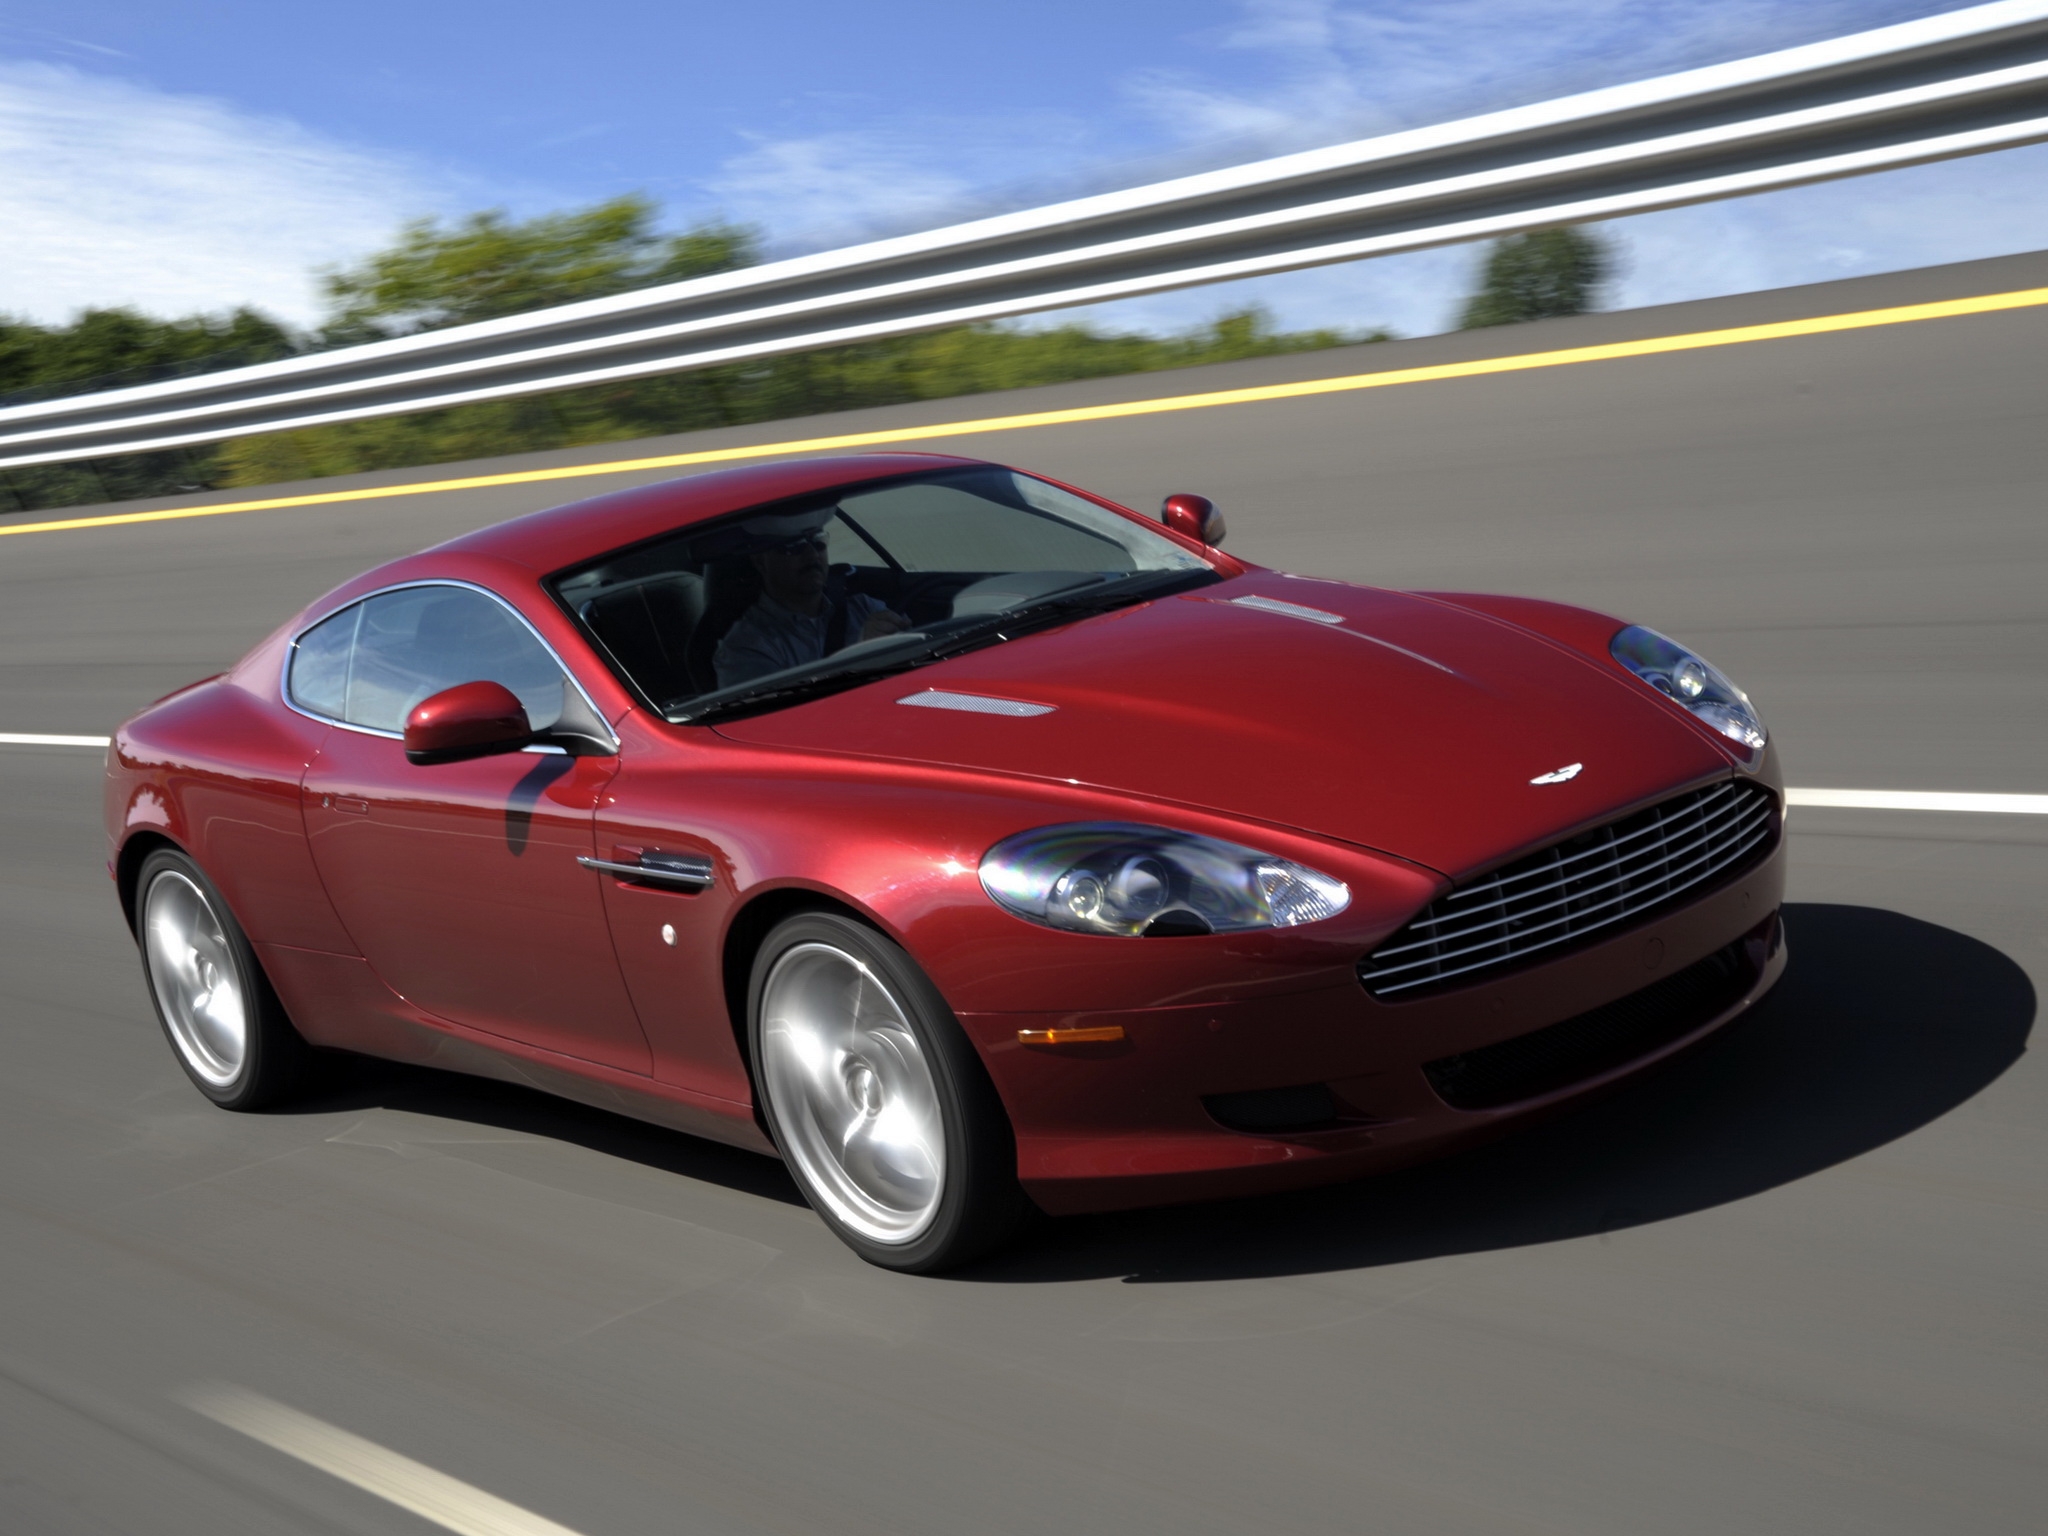 auto, trees, aston martin, cars, red, asphalt, side view, speed, style, 2008, db9 lock screen backgrounds